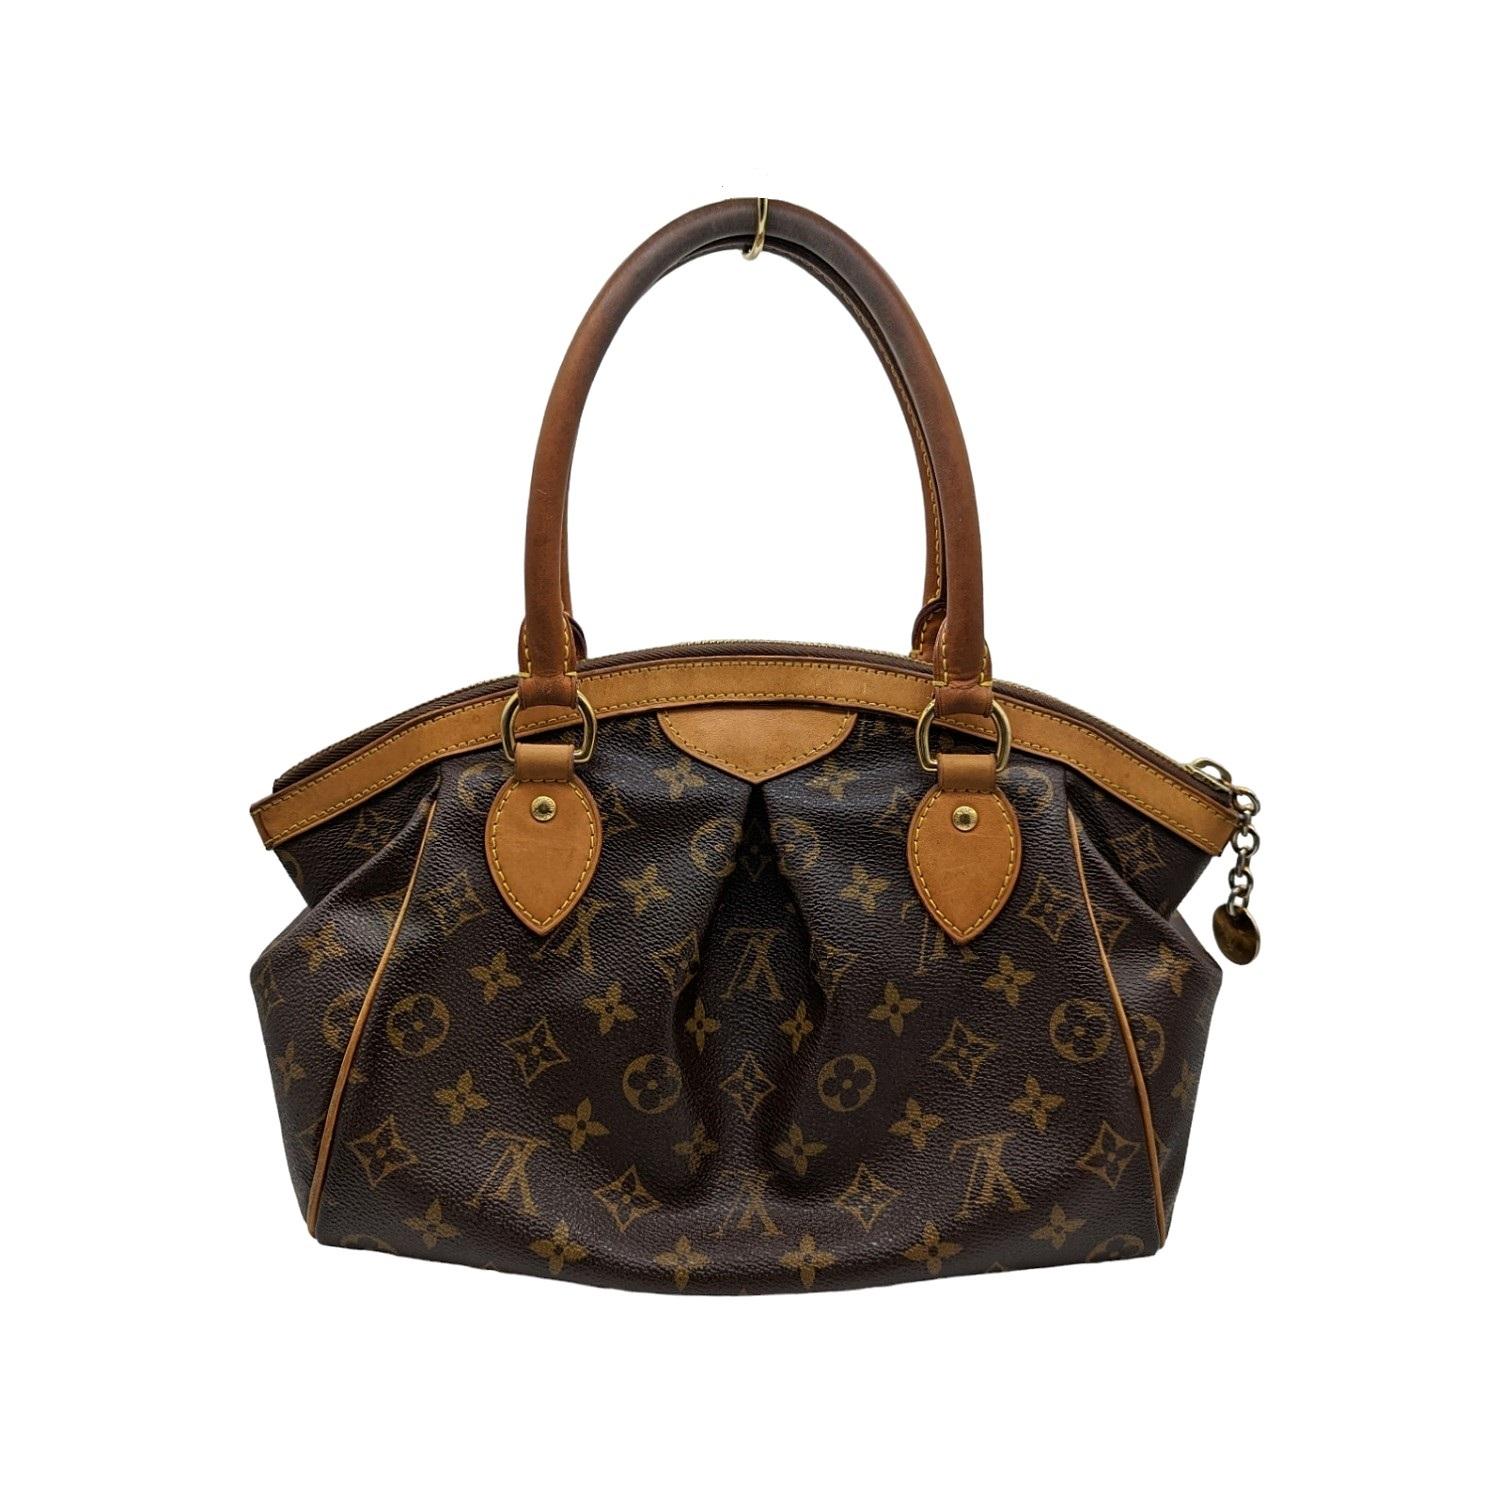 This stylish tote is finely crafted of pleated Louis Vuitton monogram on toile canvas. The shoulder bag features signature natural vachetta leather trim, rolled handles and polished brass hardware. The top zipper opens to a cocoa brown fabric